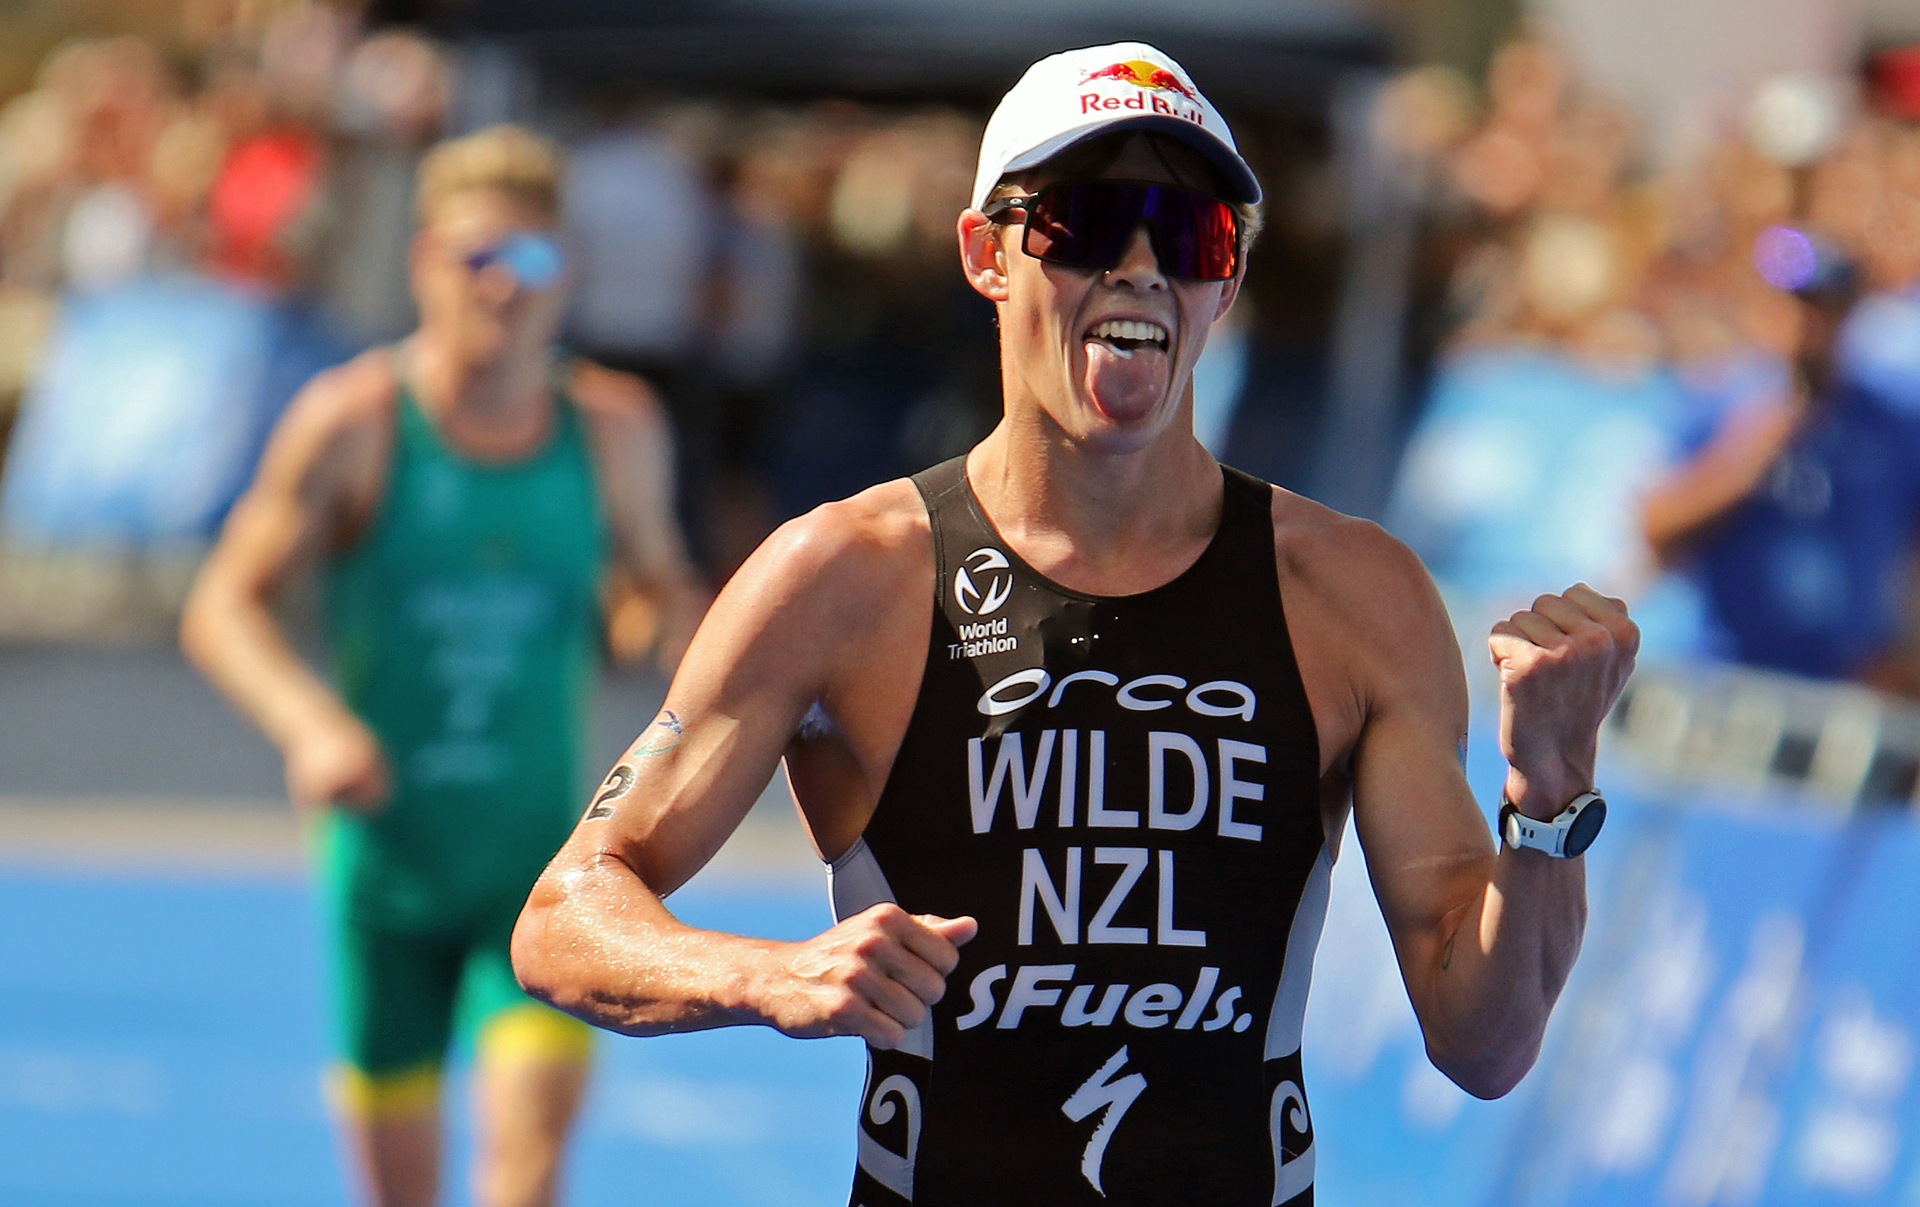 Birmingham 2022 Day one (July 29-30) New Zealand athletes and events in action, how to watch in NZ, live streaming